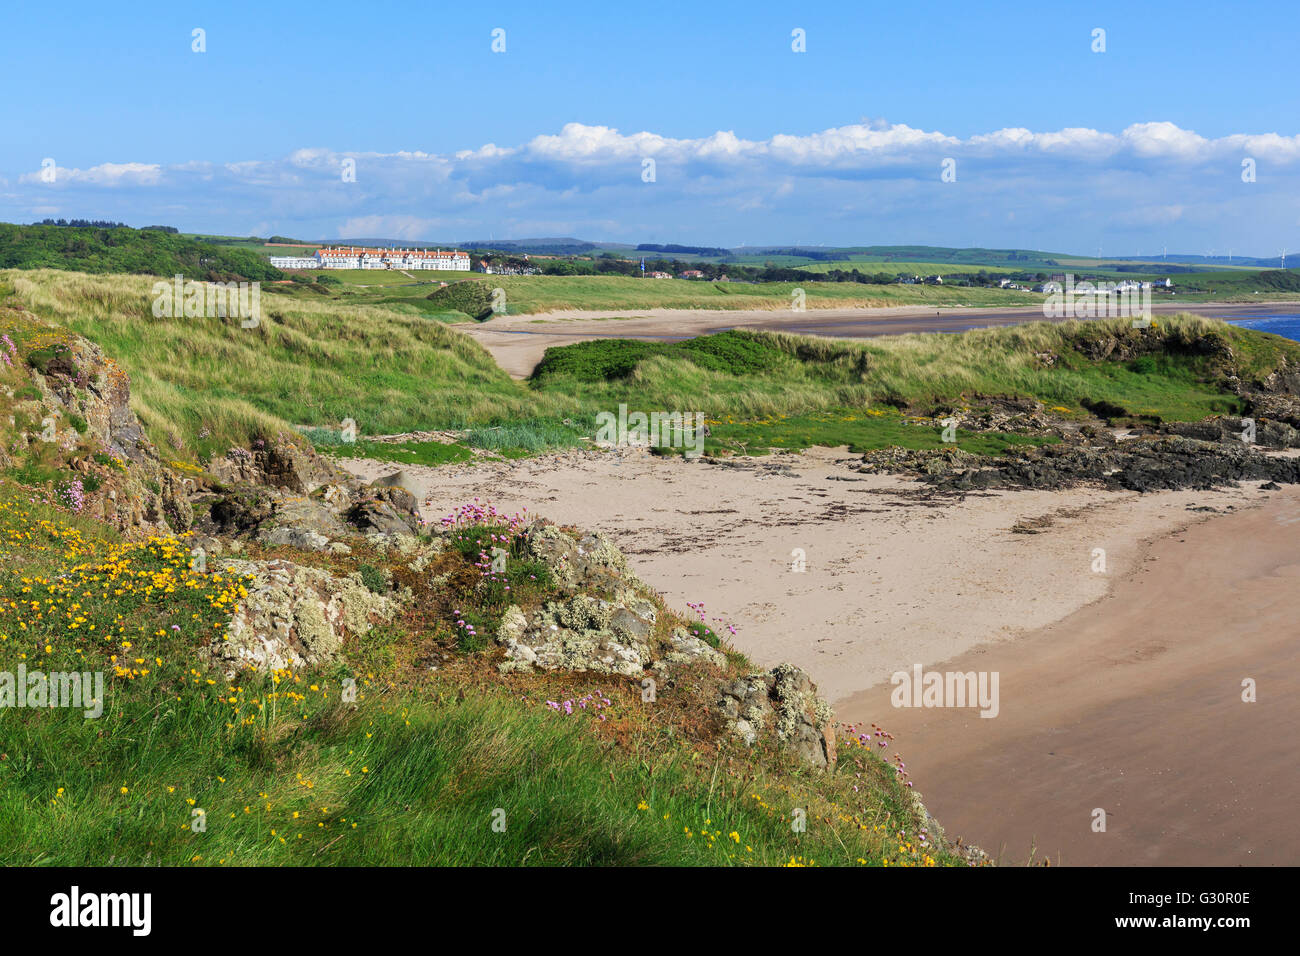 Bay at Turnberry on the edge of Trump Turnberry Golf Course showing the Trump Hotel in the distance, Ayrshire, Scotland Stock Photo